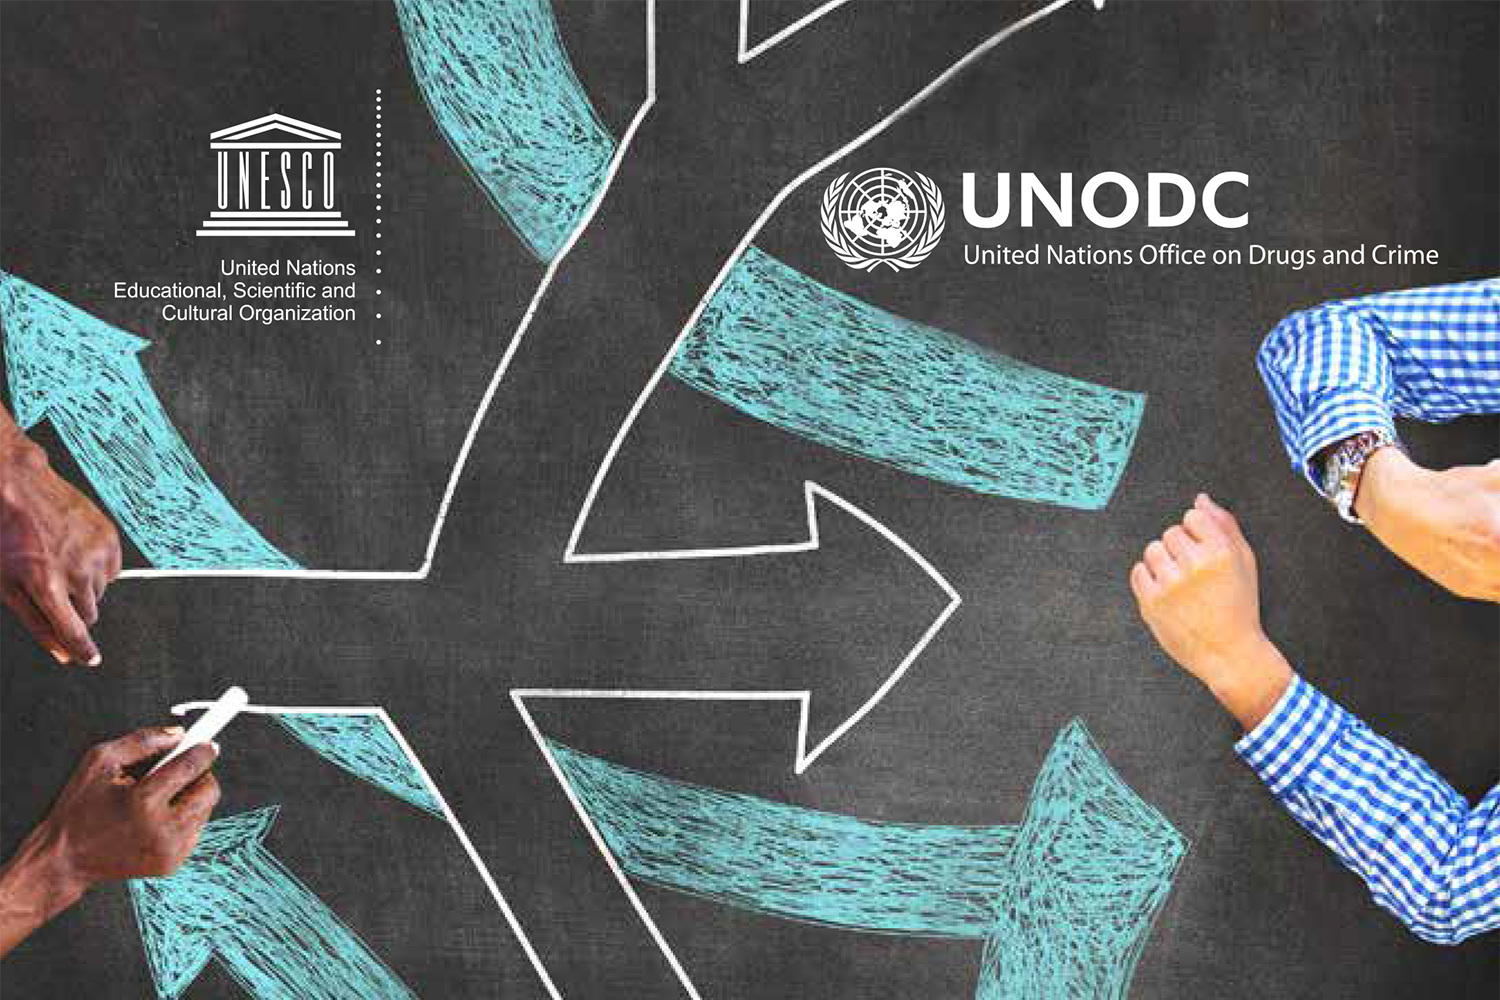 UNODC and UNESCO jointly strengthening rule of law through education